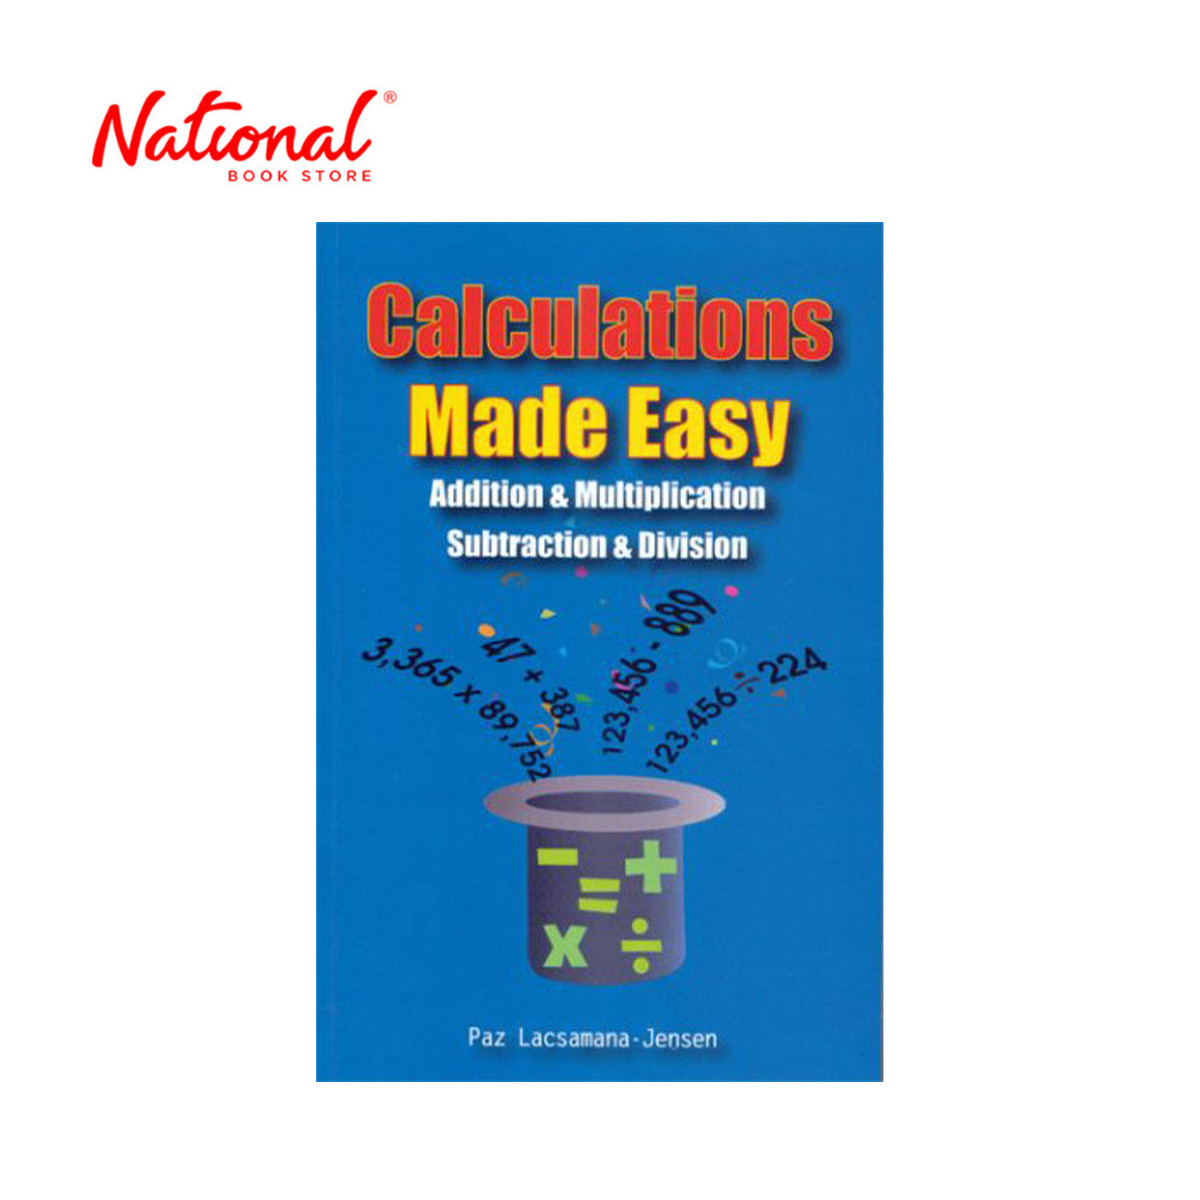 Calculations Made Easy by Paz Lacsamana-Jensen - Trade Paperback - High School Books